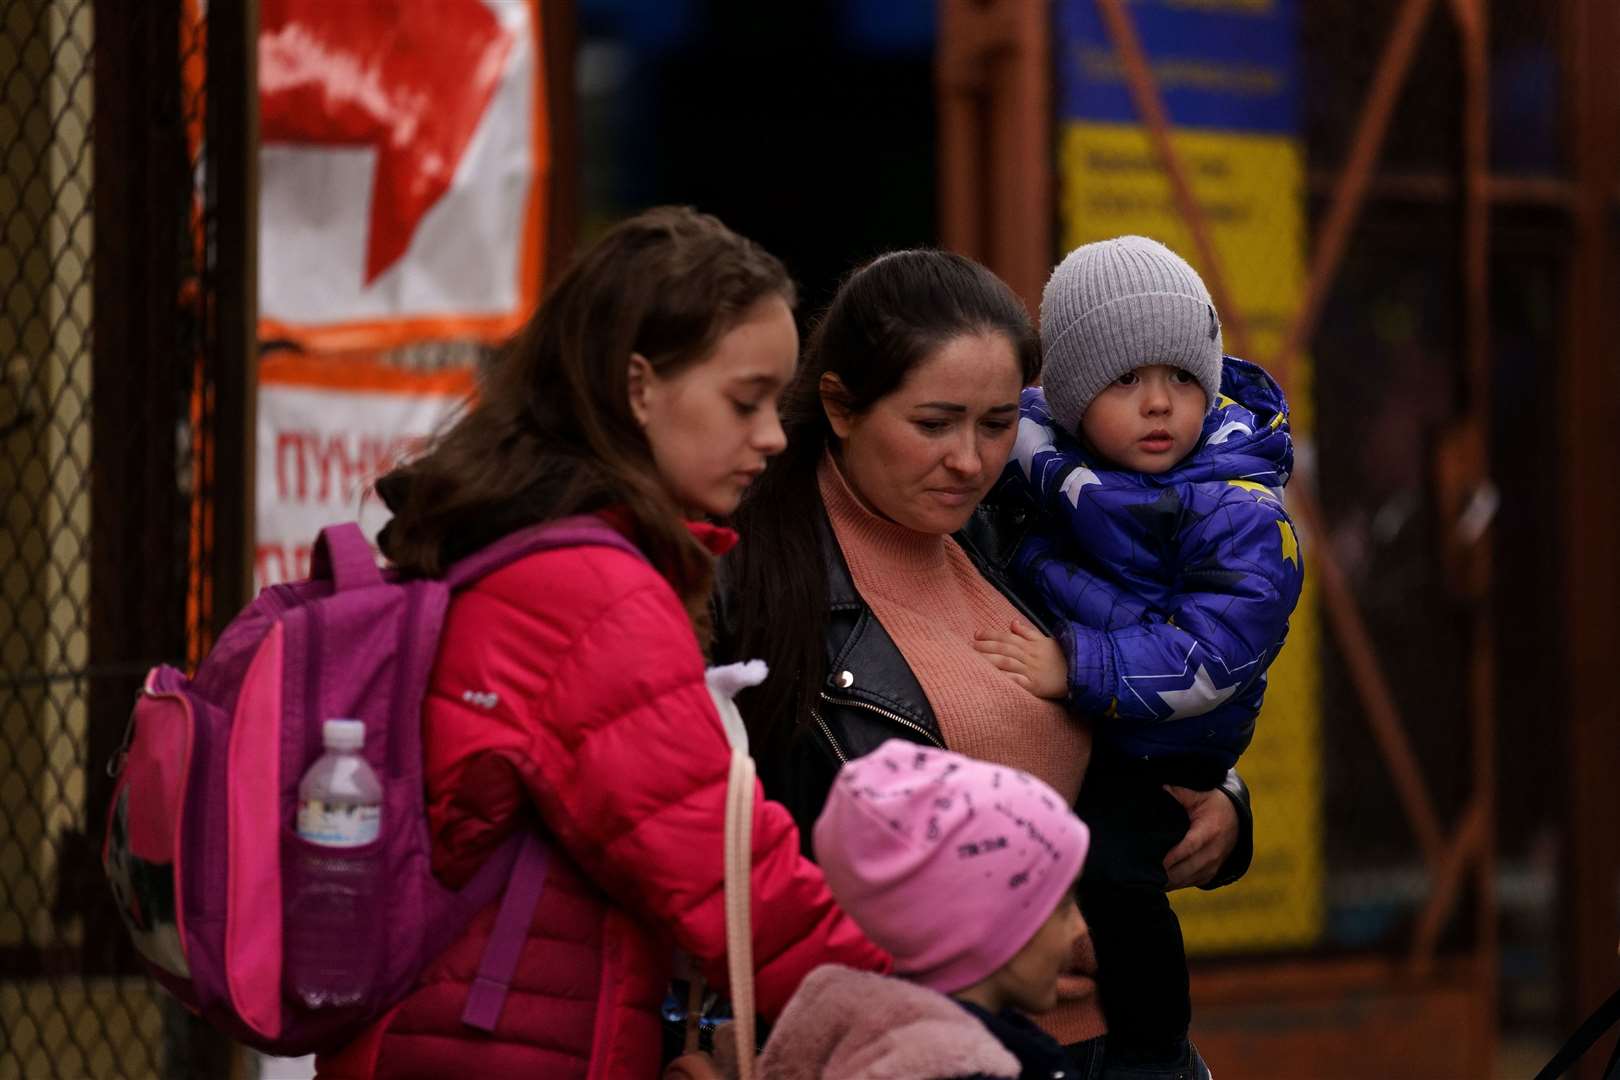 A Ukrainian family walk out of the customs office at Przemysl Glowny train station in Poland (Victoria Jones/PA)